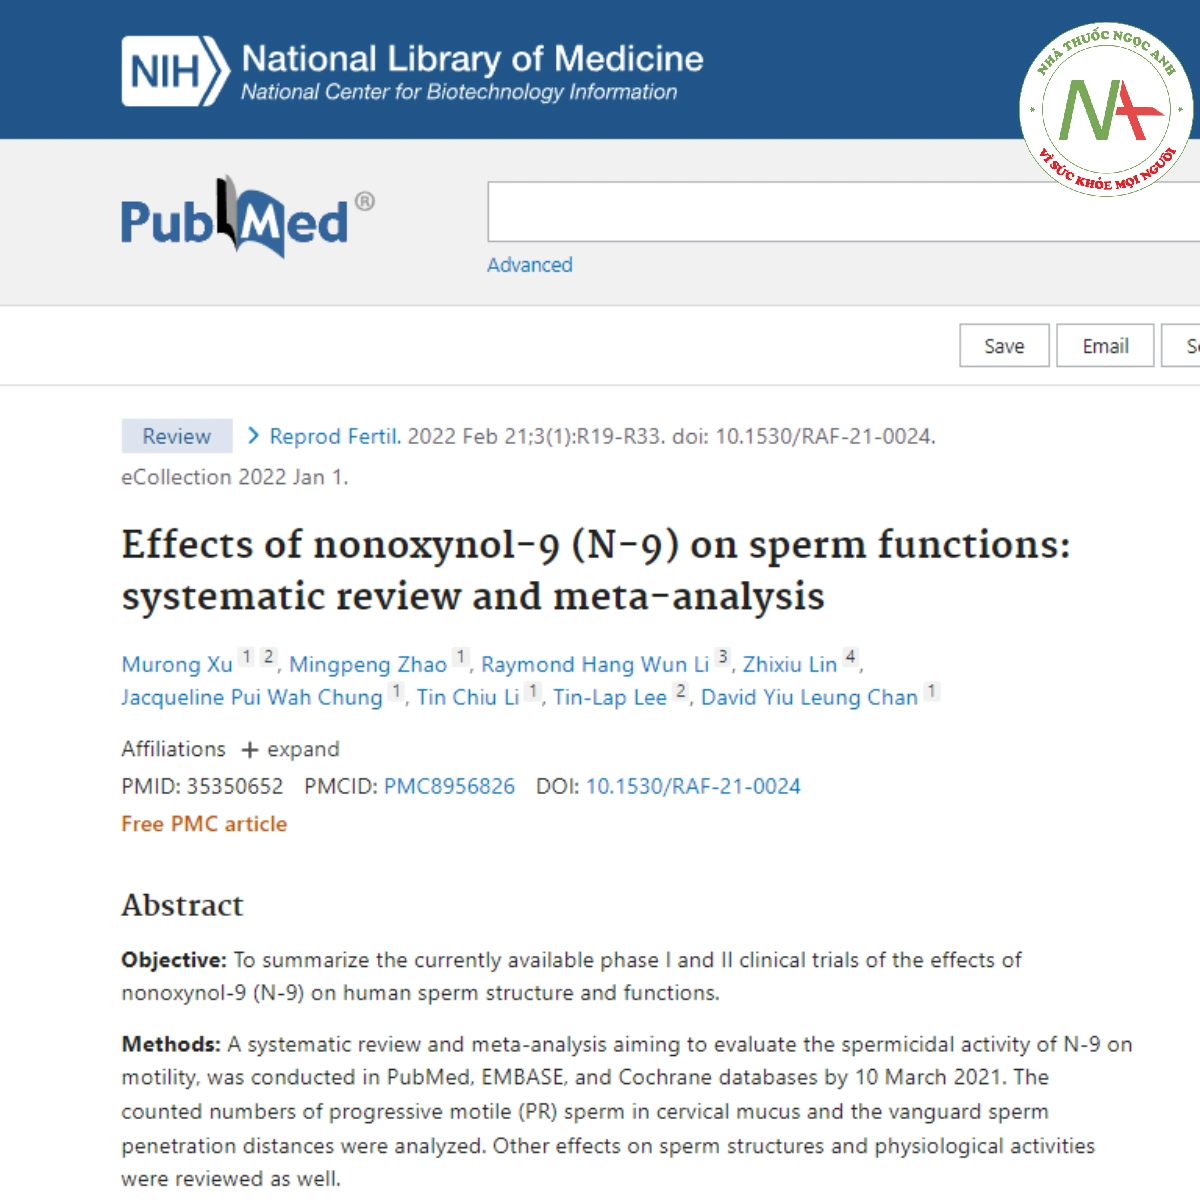 Effects of nonoxynol-9 (N-9) on sperm functions_ systematic review and meta-analysis